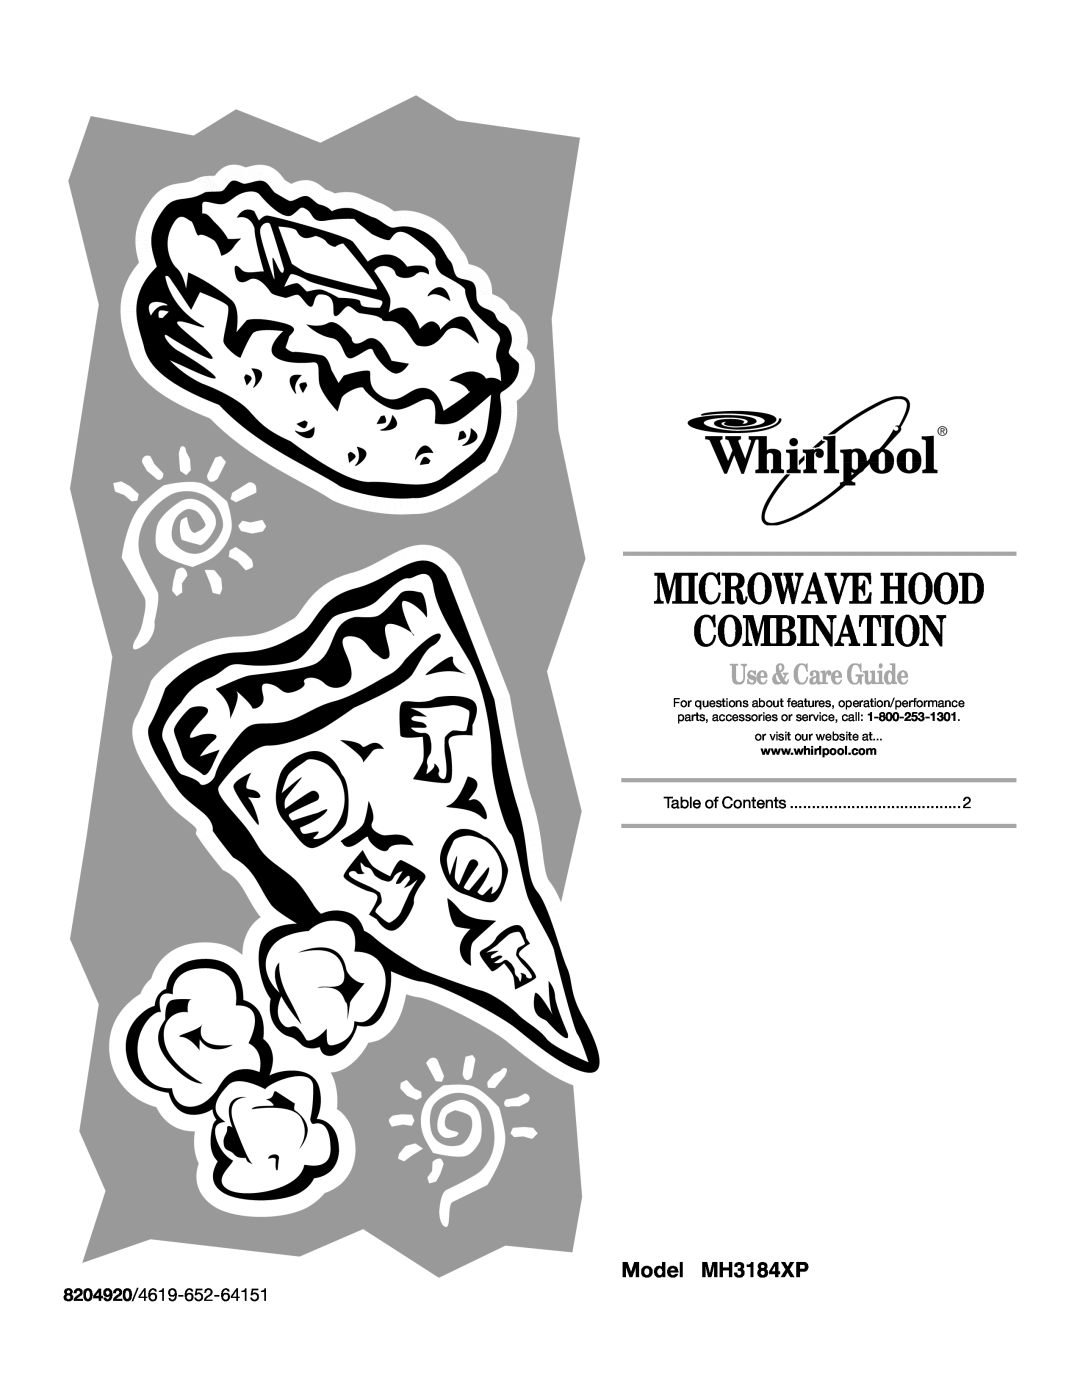 Whirlpool MH3184XPS manual Model MH3184XP, 8204920/4619-652-64151, Microwave Hood Combination, Use & Care Guide 